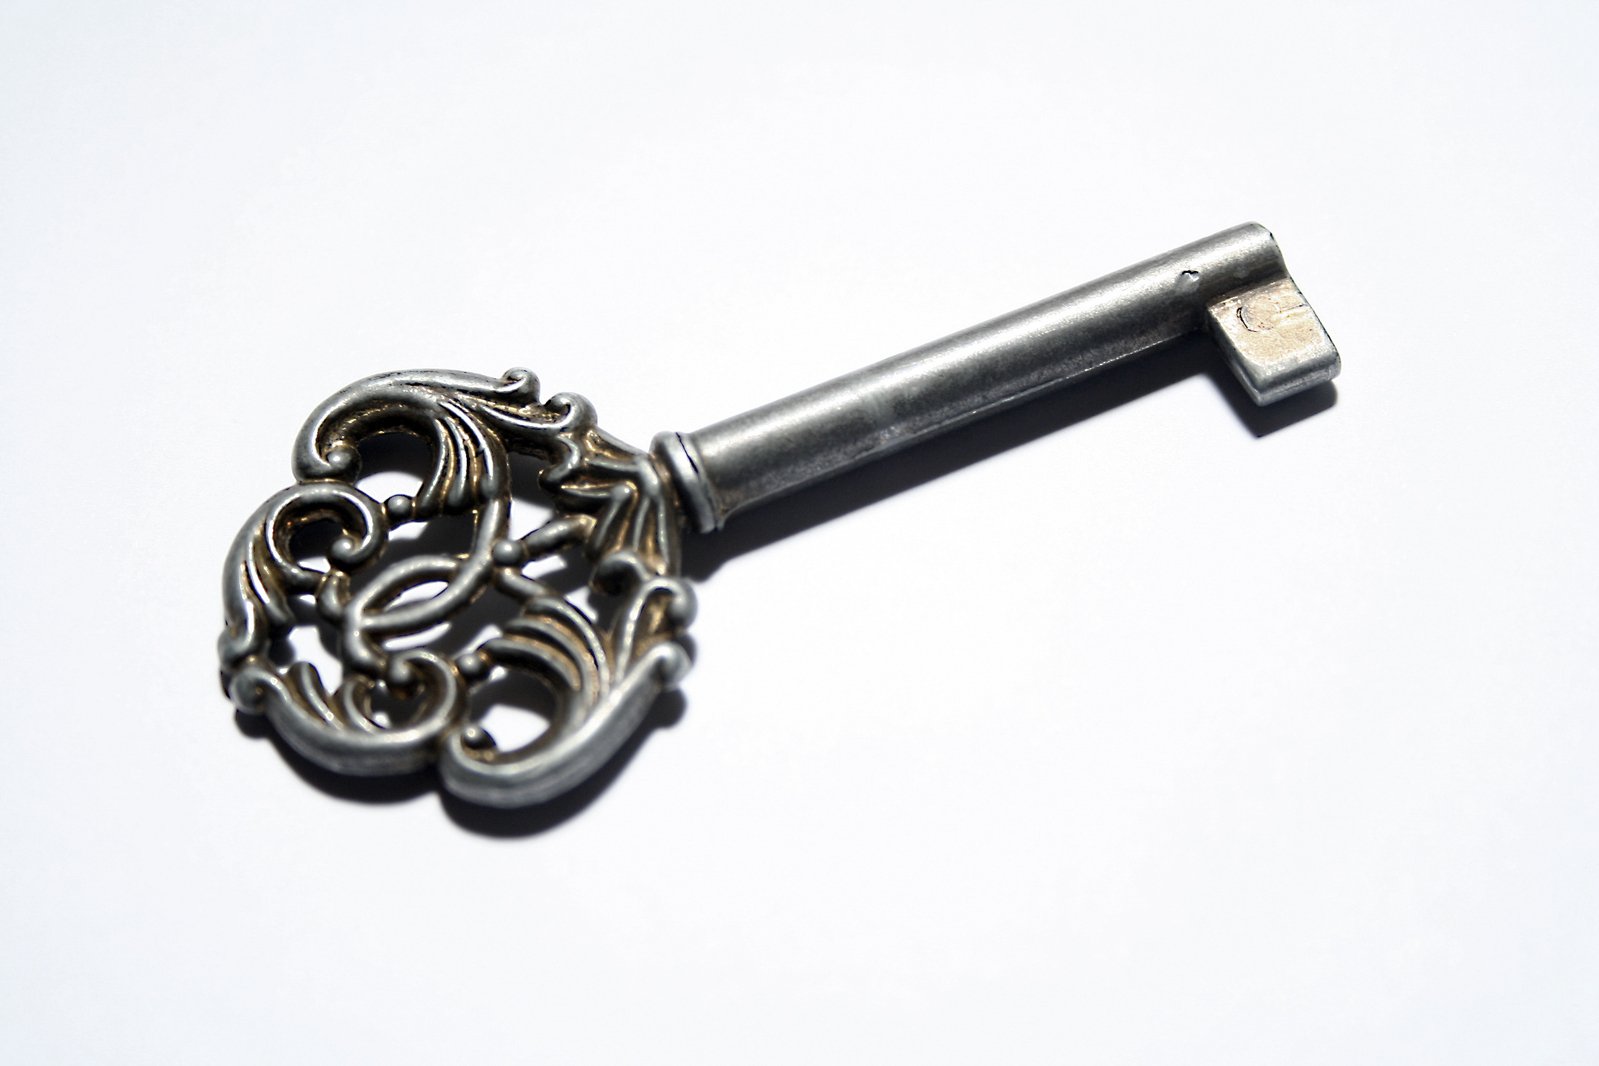 a close up image of a key from the game of throne